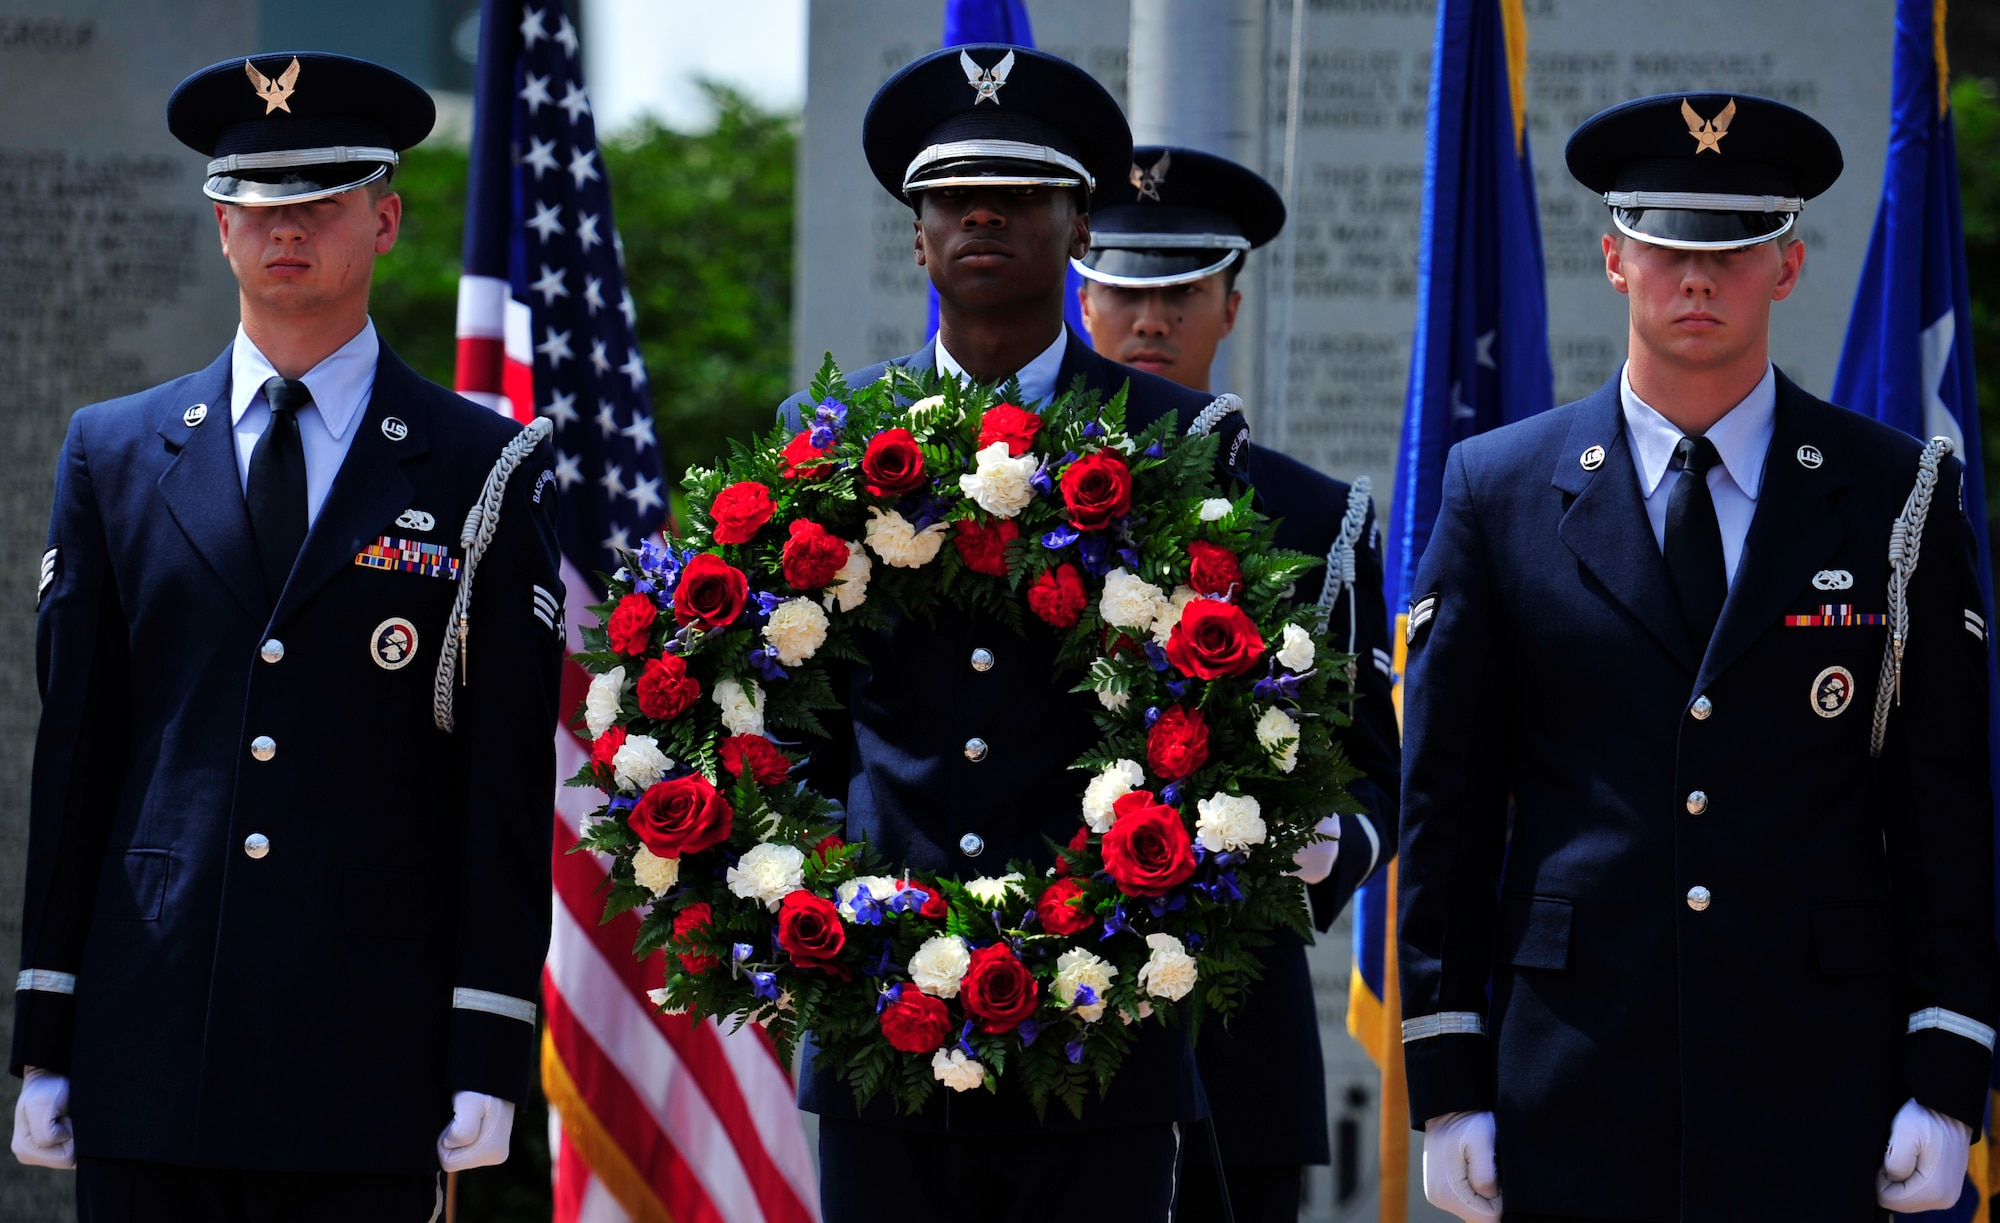 The honor guard presents a wreath during the Operation Eagle Claw memorial ceremony at the air park on Hurlburt Field, Fla., April 24, 2015.  The rose wreath was placed in honor of the eight service members who lost their lives during the operation. (U.S. Air Force photo/Staff Sgt. Melanie Holochwost)